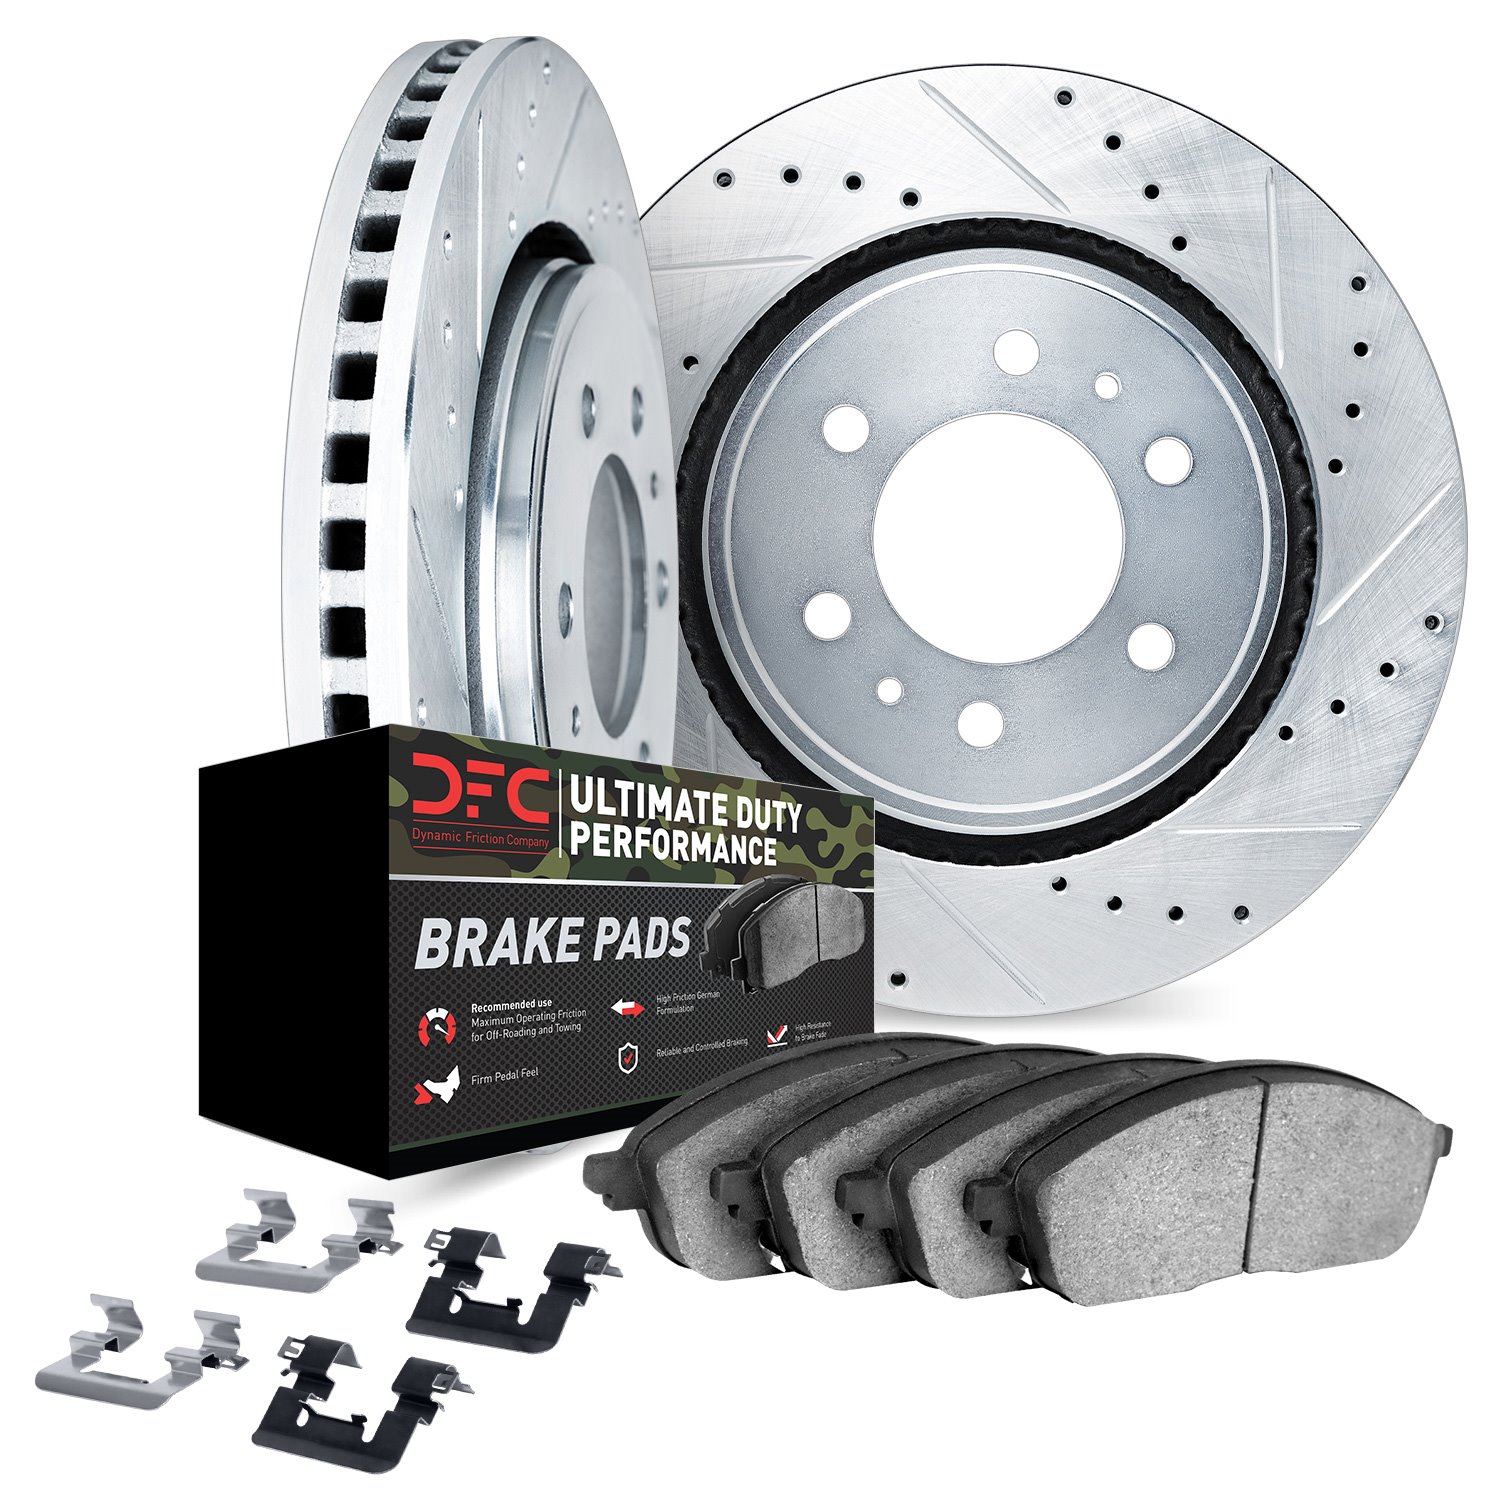 7412-76005 Drilled/Slotted Brake Rotors with Ultimate-Duty Brake Pads Kit & Hardware [Silver], 1981-1989 Lexus/Toyota/Scion, Pos